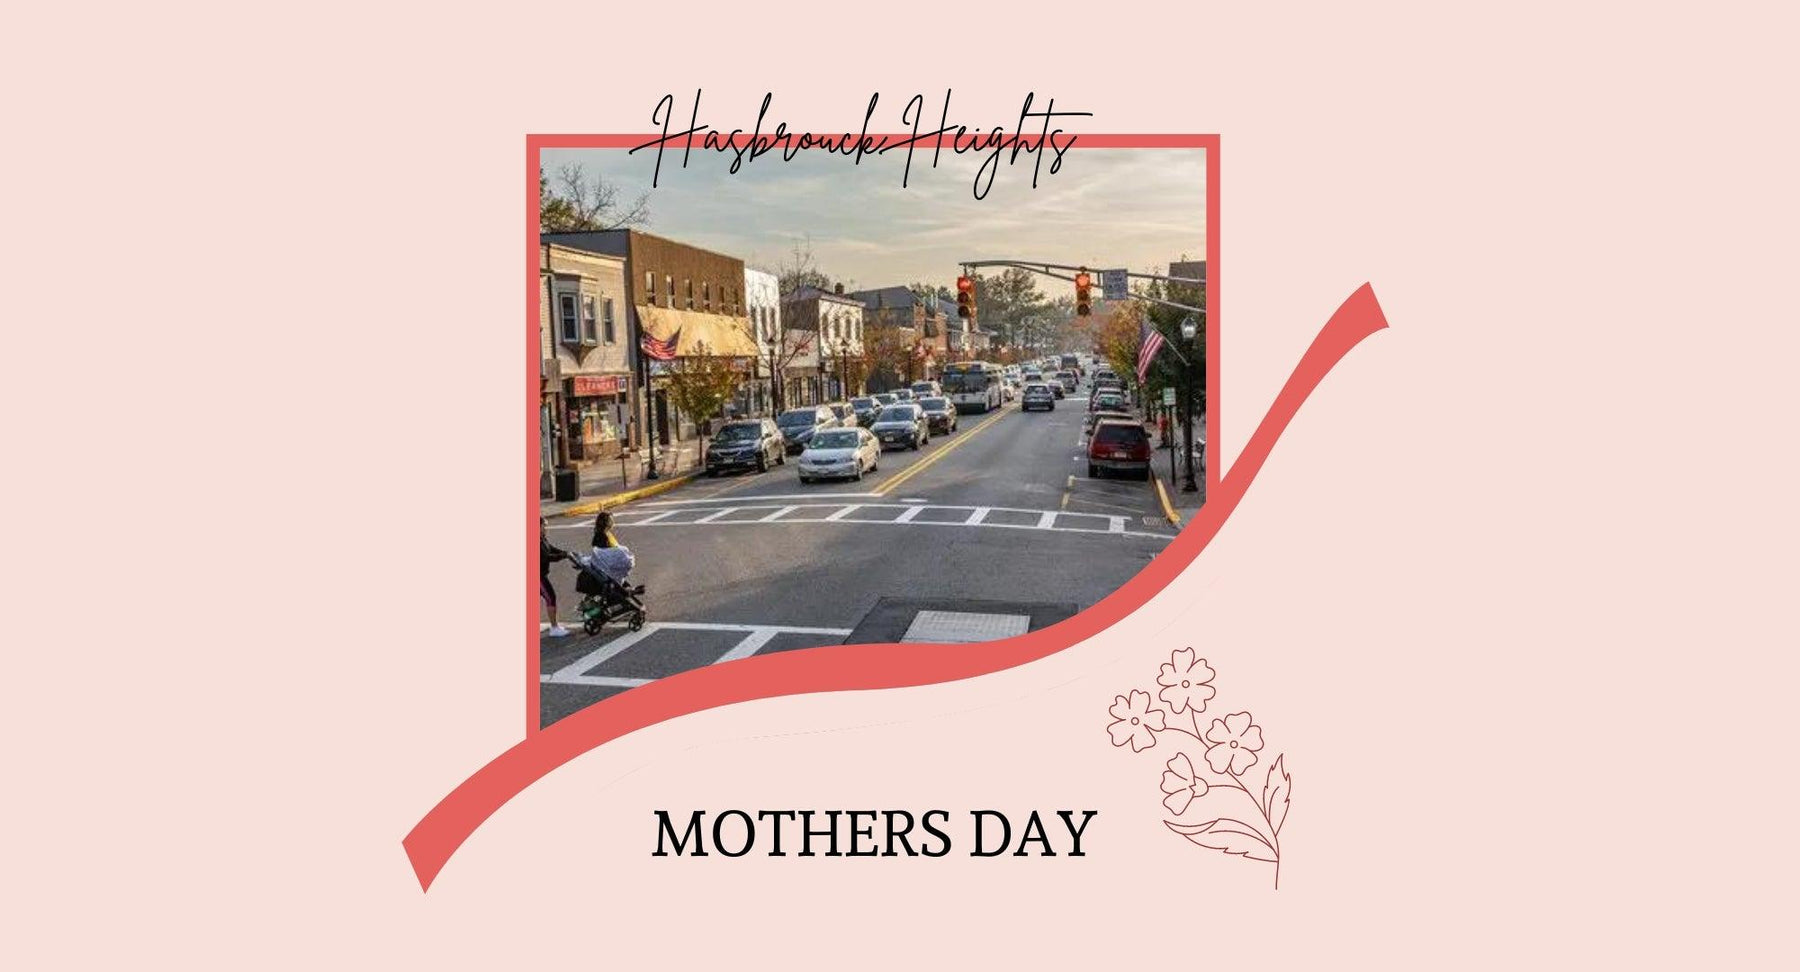 Mother's Day In Hasbrouck Heights May 14th - Modern Memory Design Picture frames - NJ Frame shop Custom framing